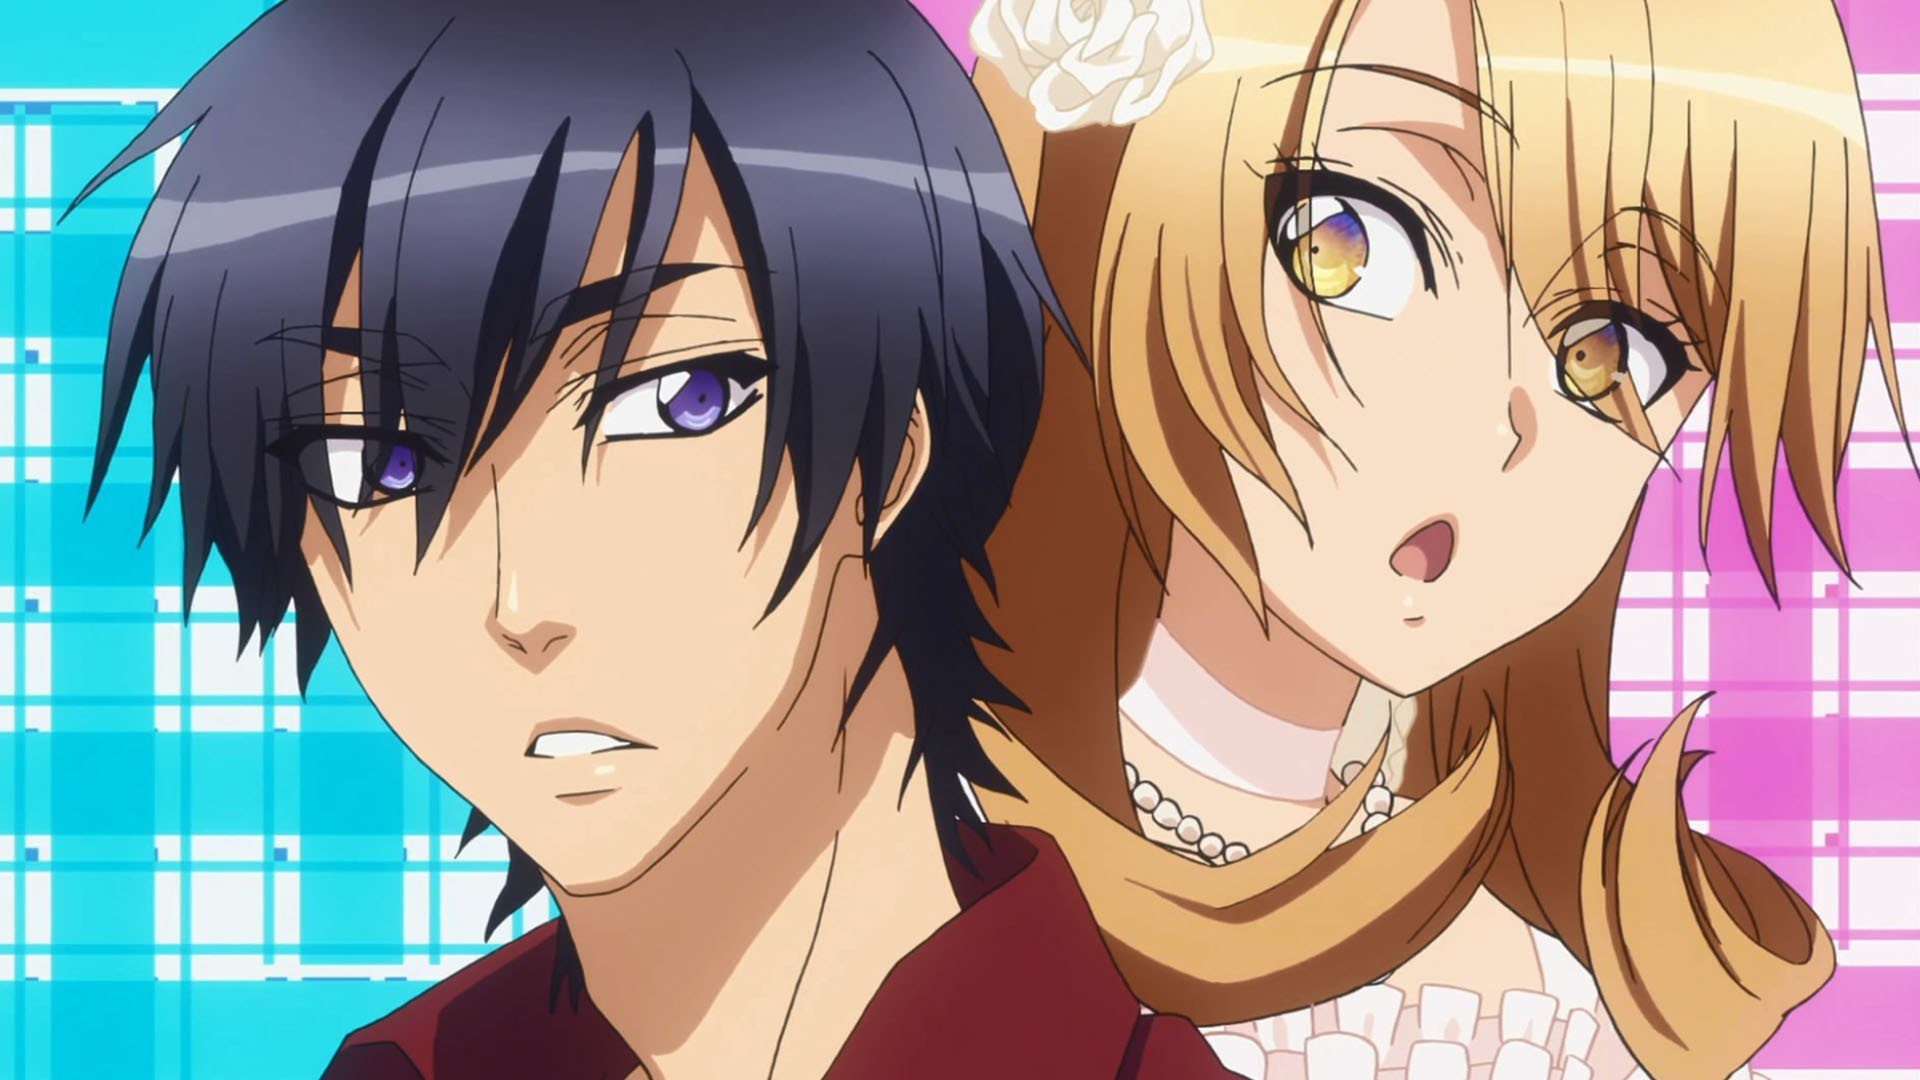 Love stage